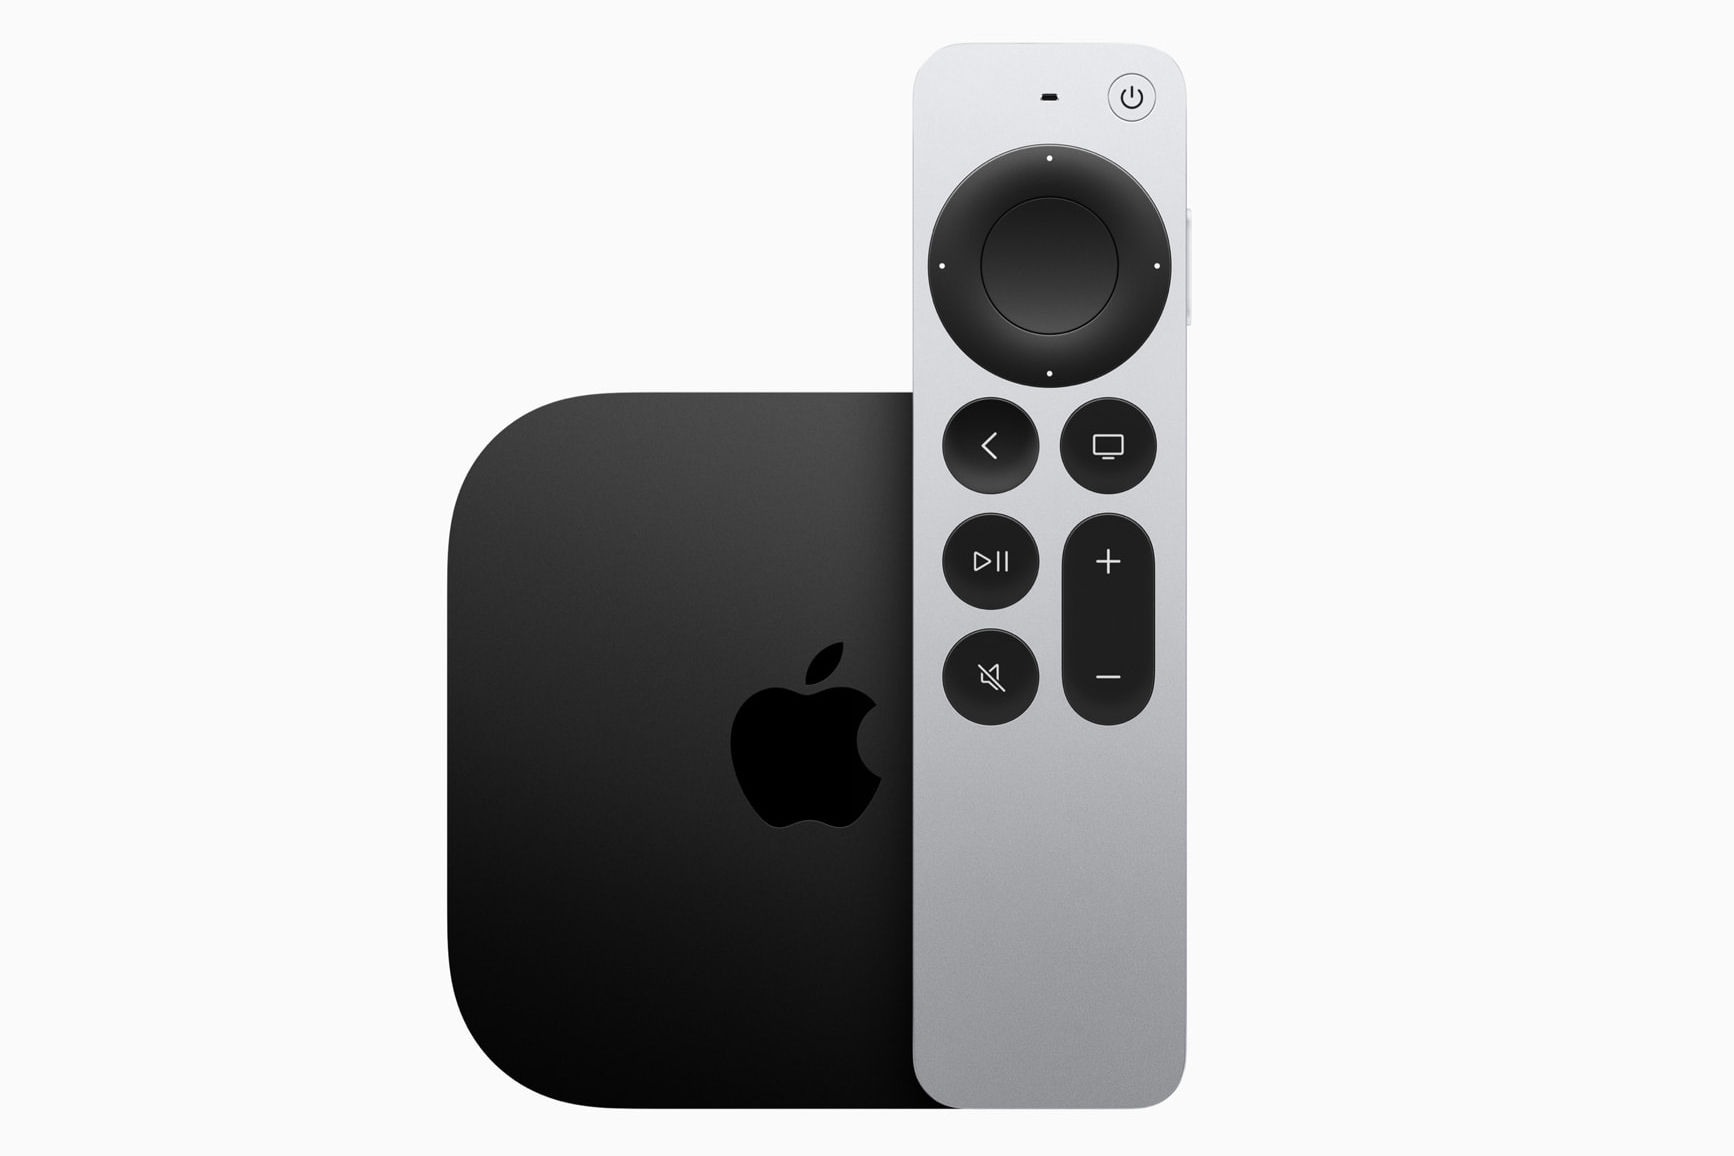 Betjening mulig matrix Forfatning How to pair an Apple TV remote with an Apple TV | Digital Trends